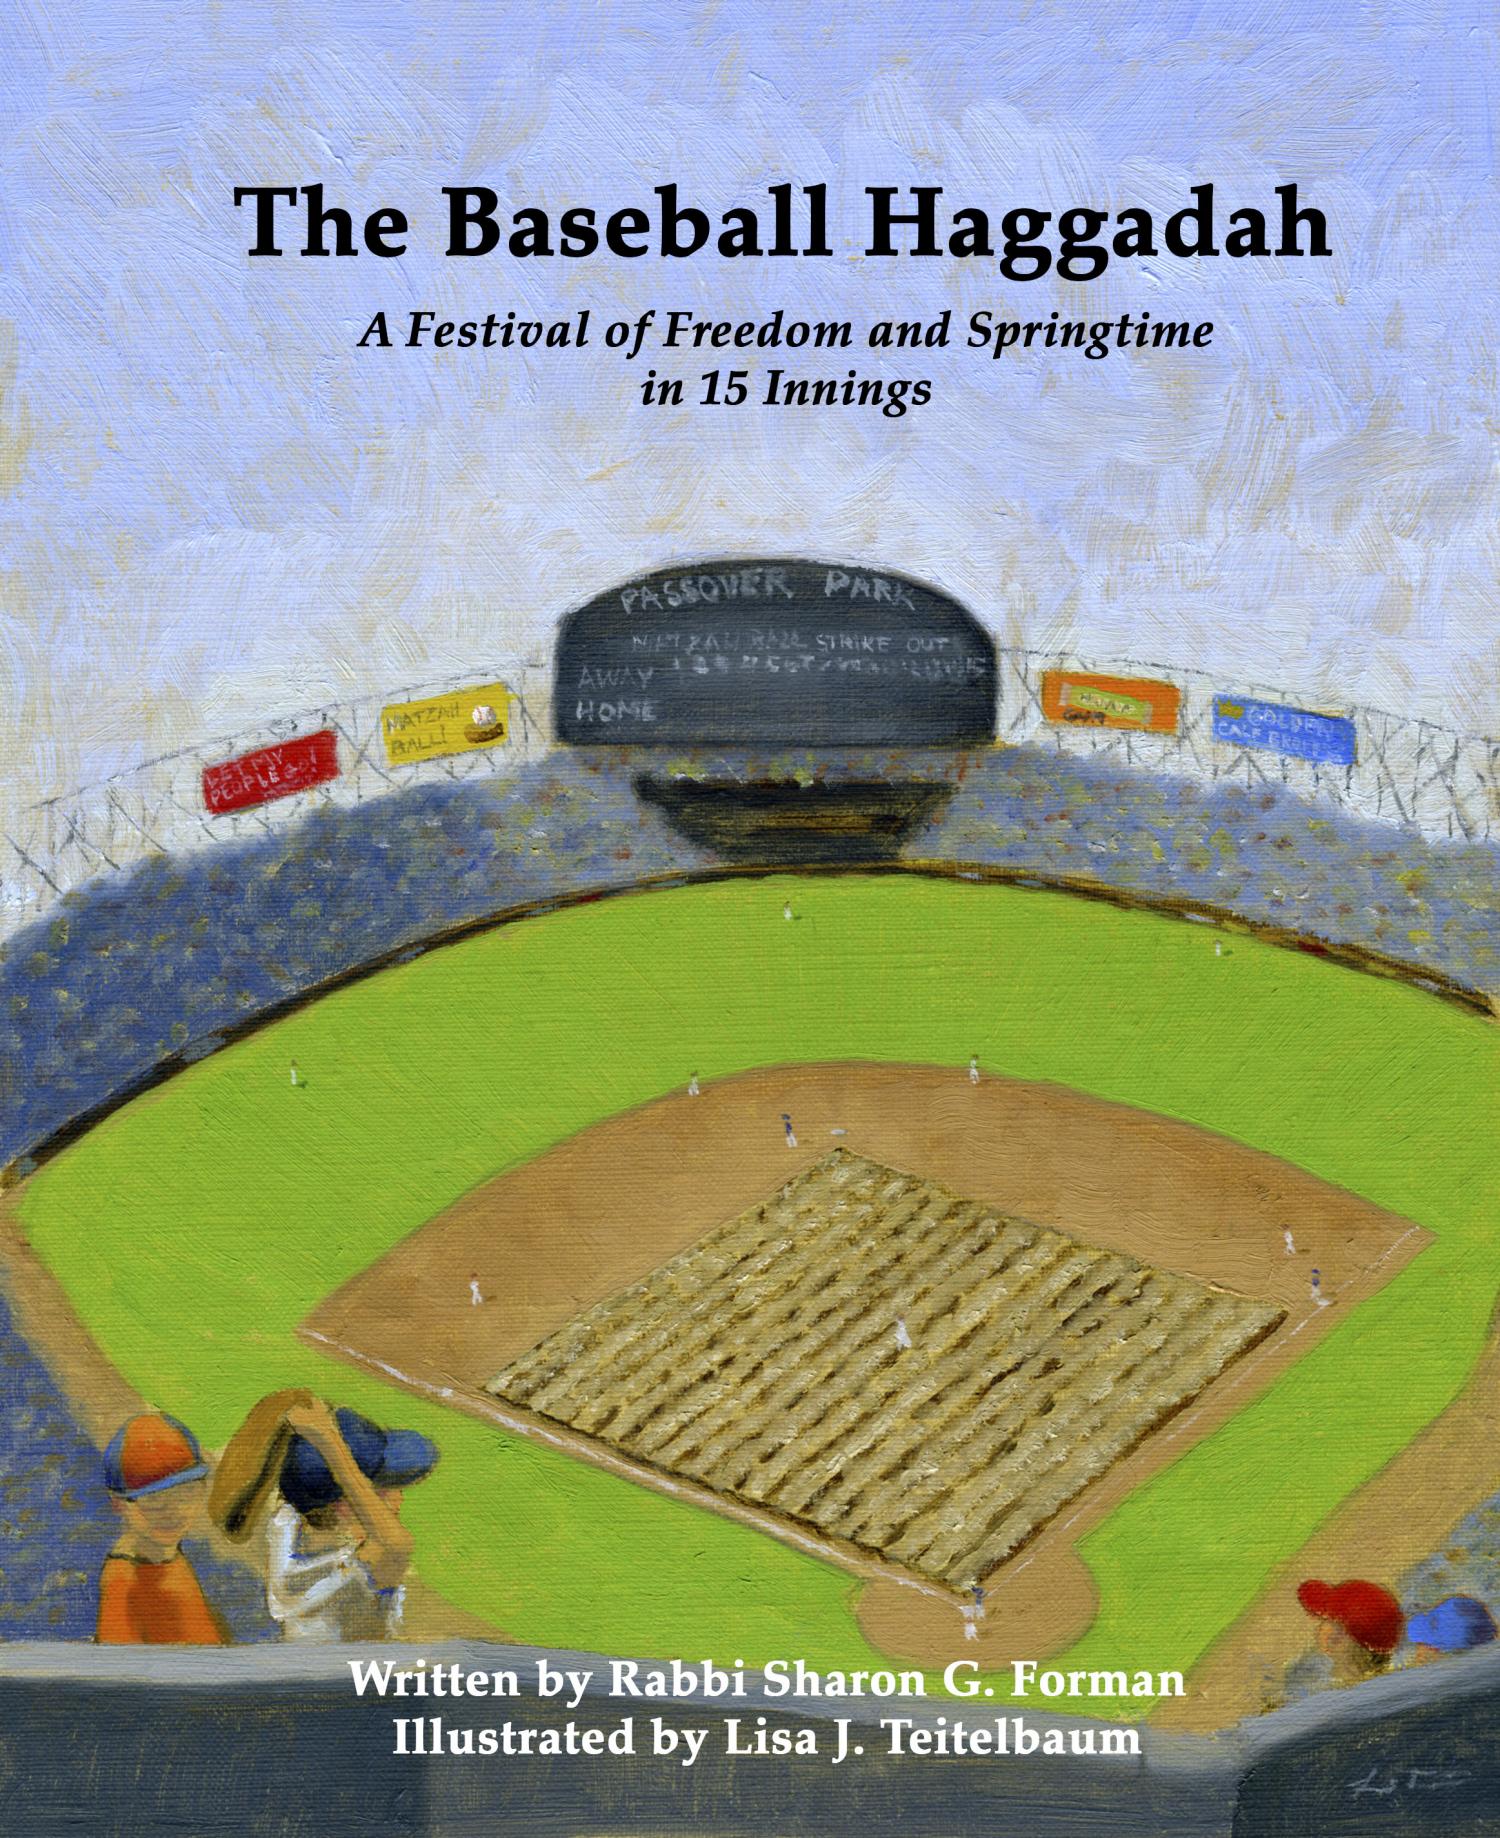 Front Cover of The Baseball Haggadah by Rabbi Sharon Forman, illustrated by Lisa Teitelbaum